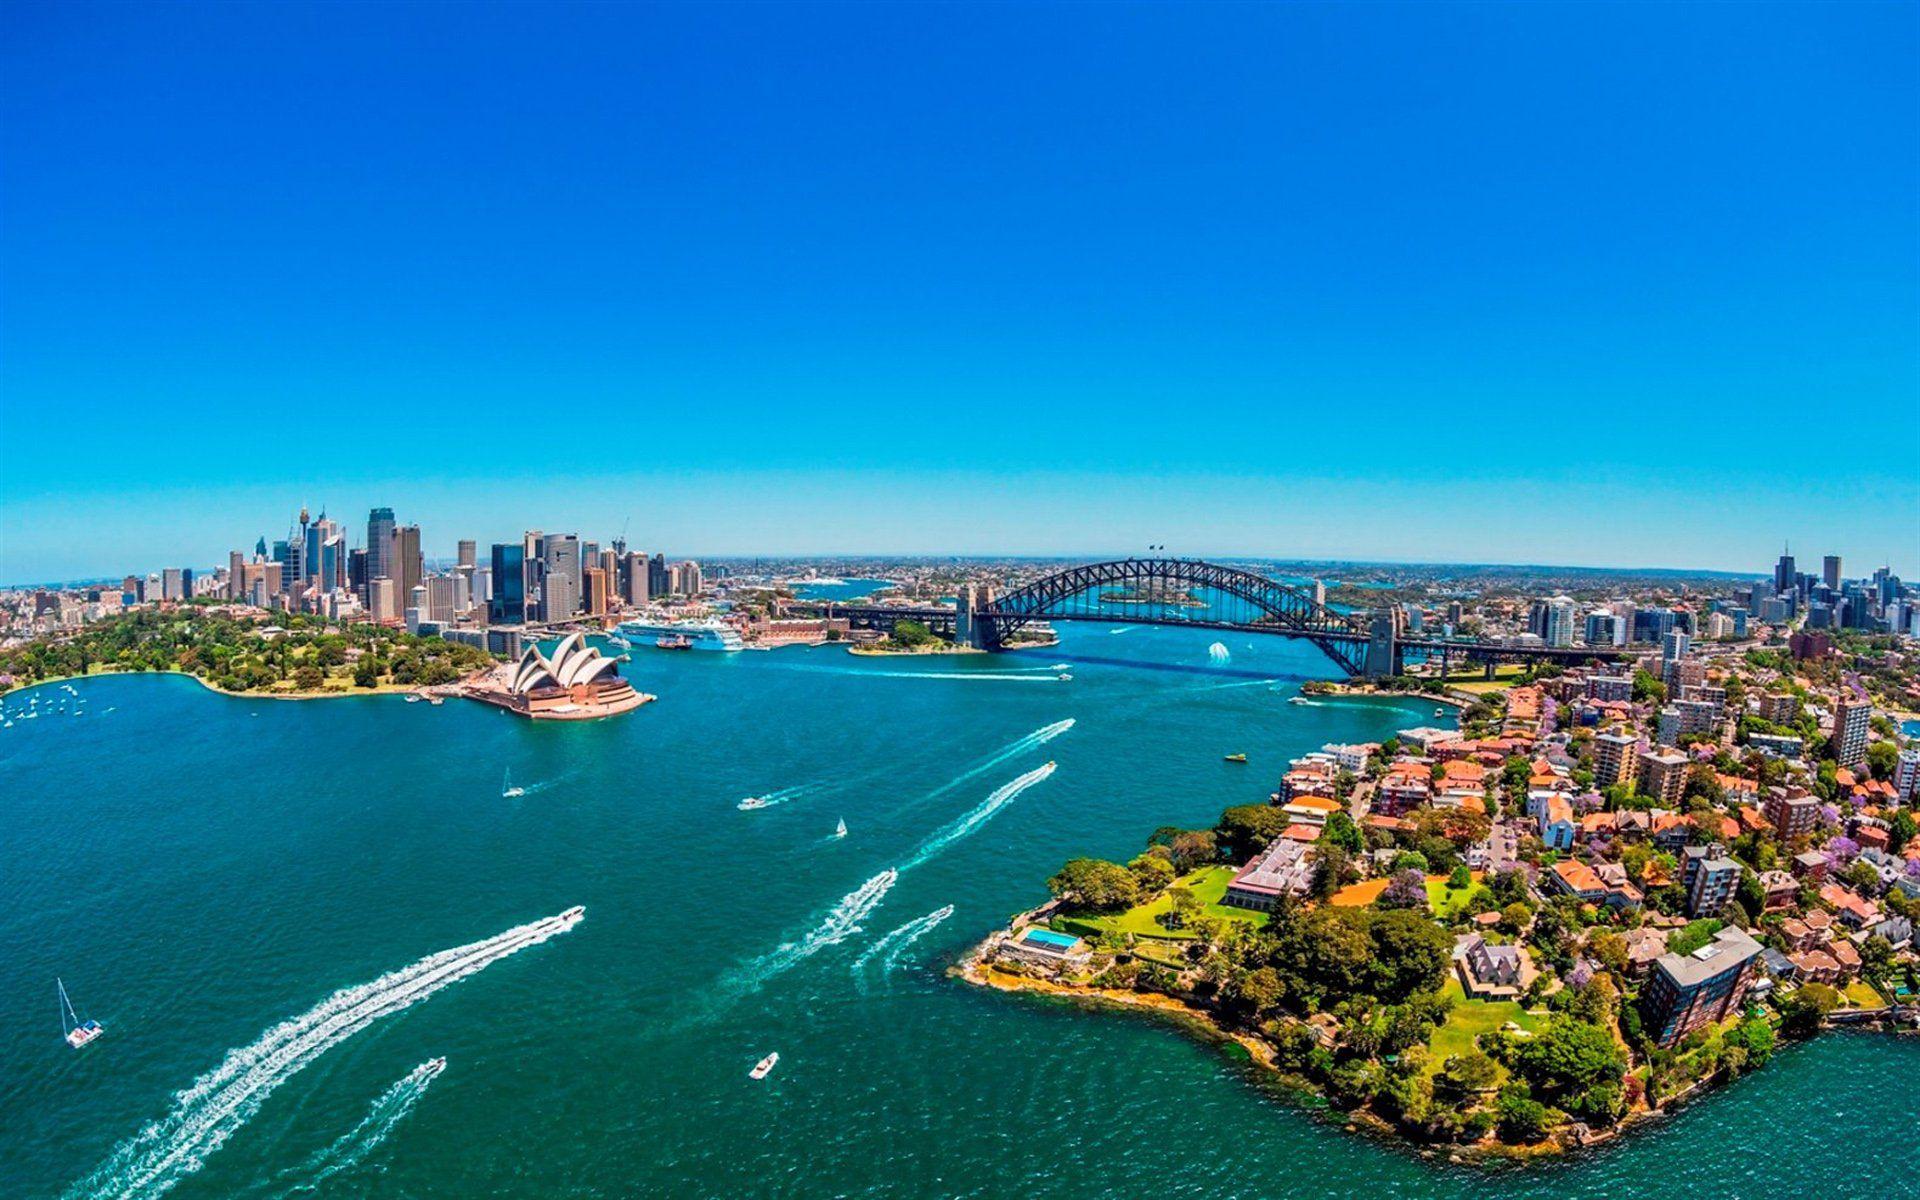 Aerial View of Sydney Harbour HD Wallpaper. Background Image